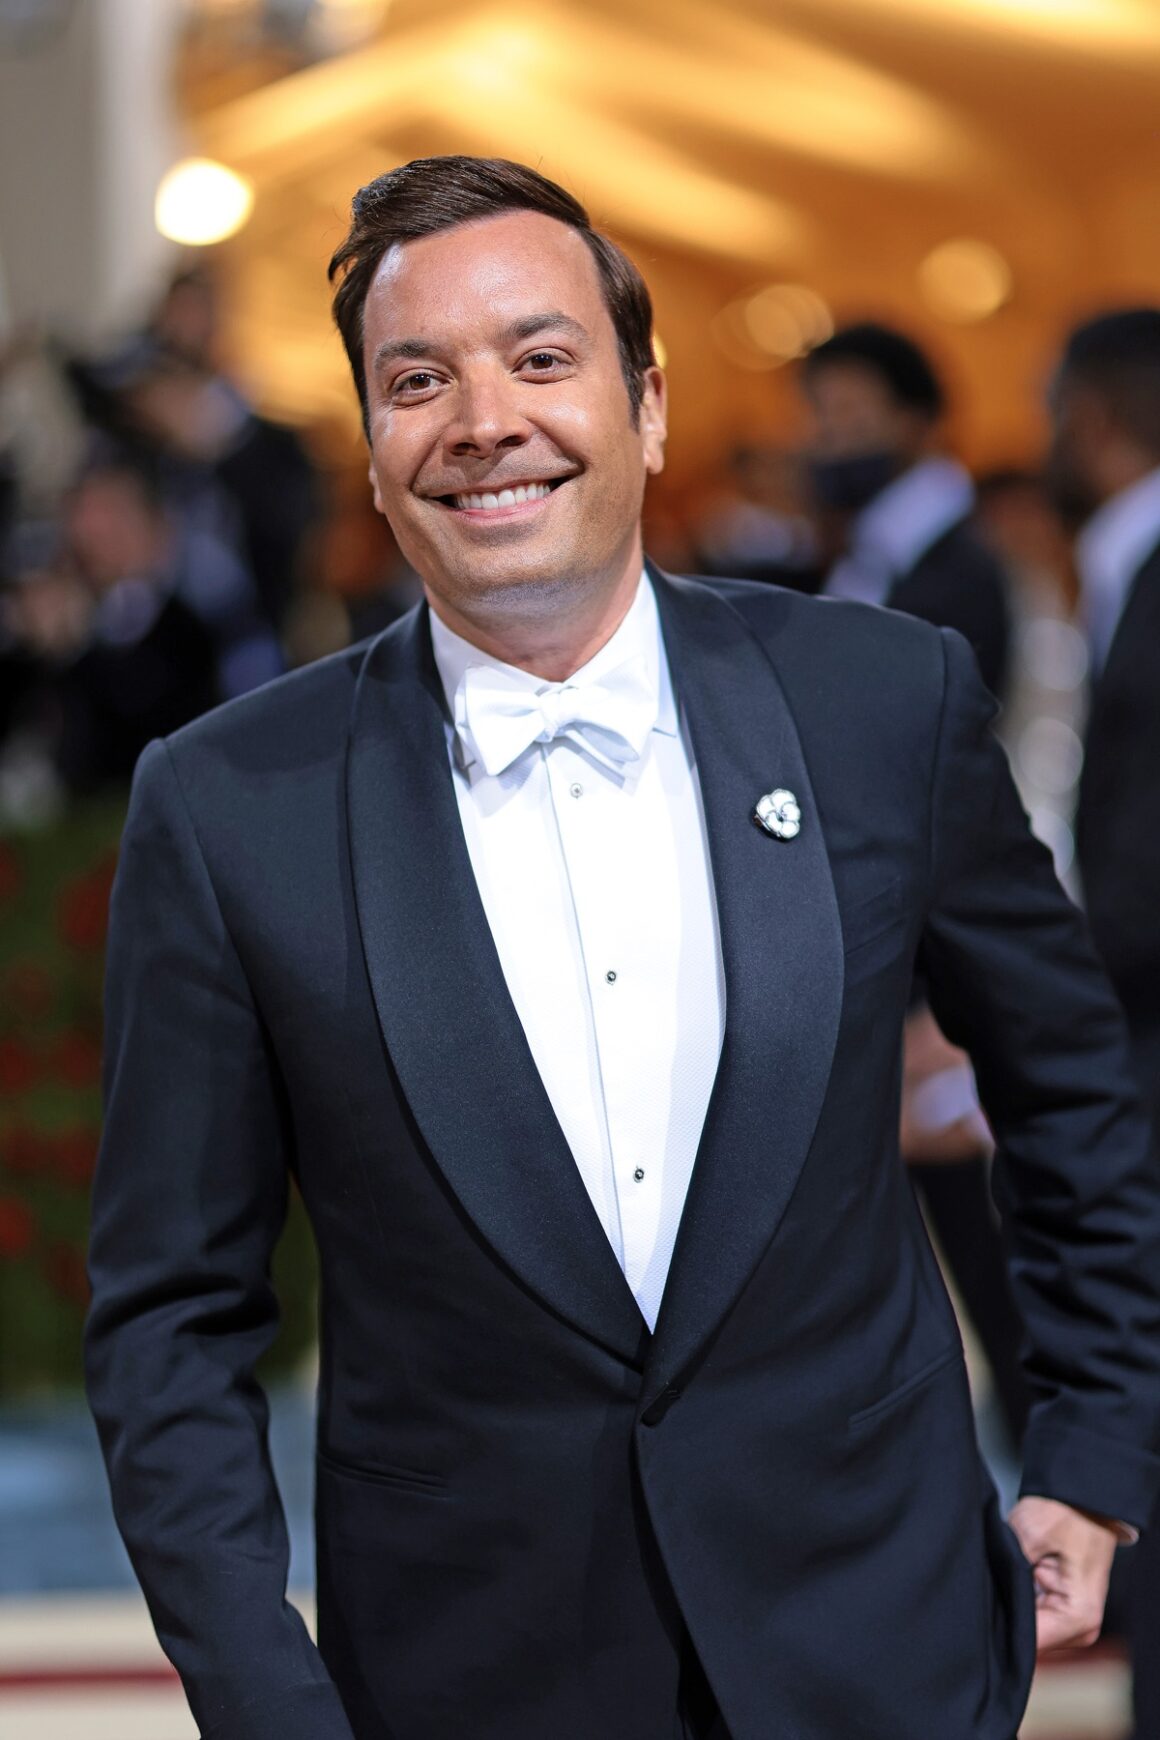 Jimmy Fallon The 2022 Met Gala Celebrating "In America: An Anthology of Fashion" - Arrivals